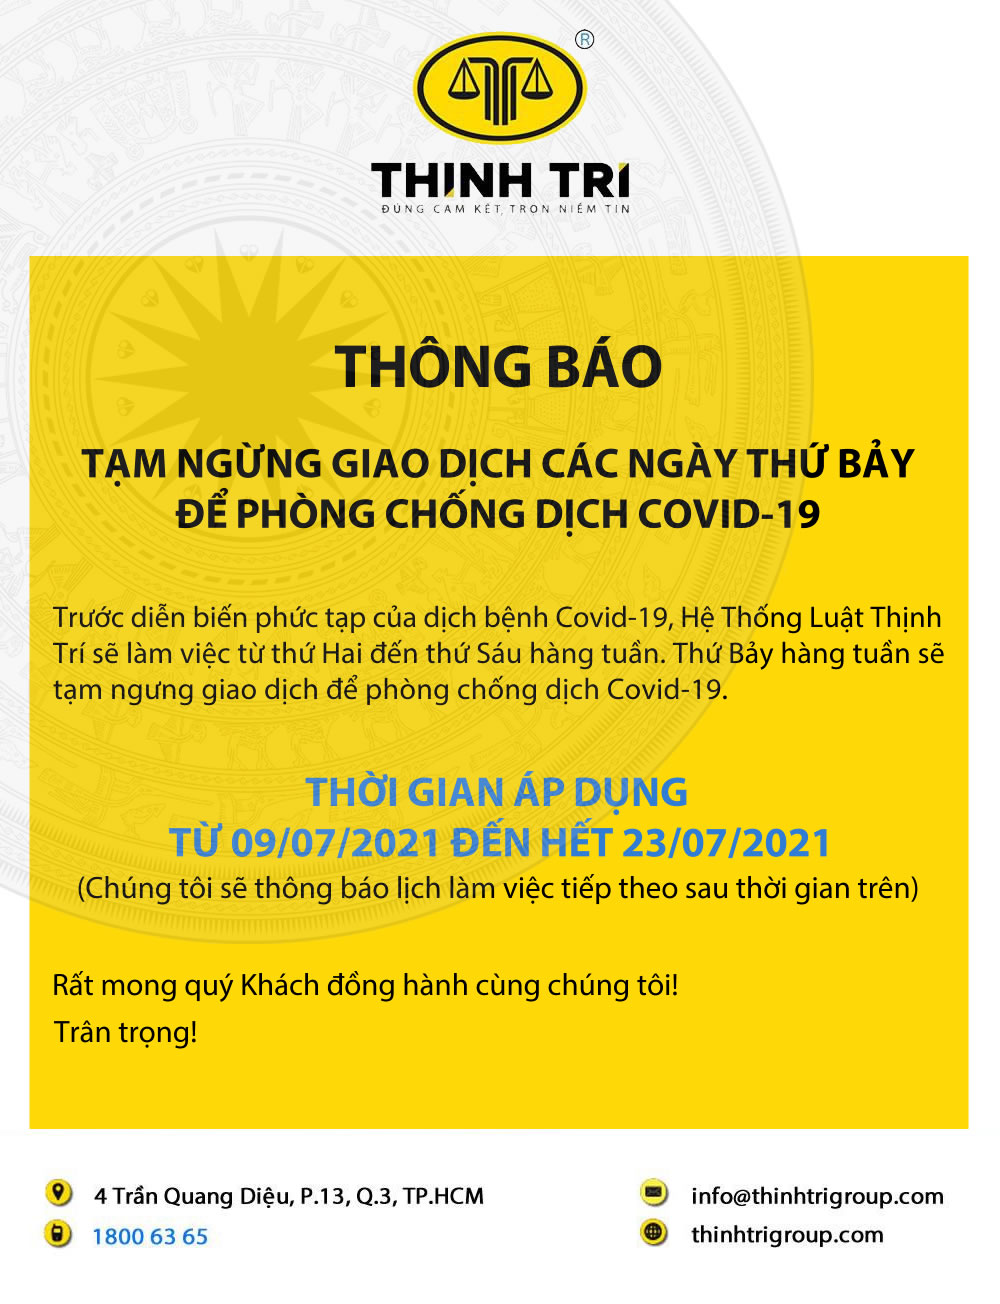 THIEN TRI LAW STOPS RUNNING ON EVERY SATURDAY TO PREVENT COVID-19 